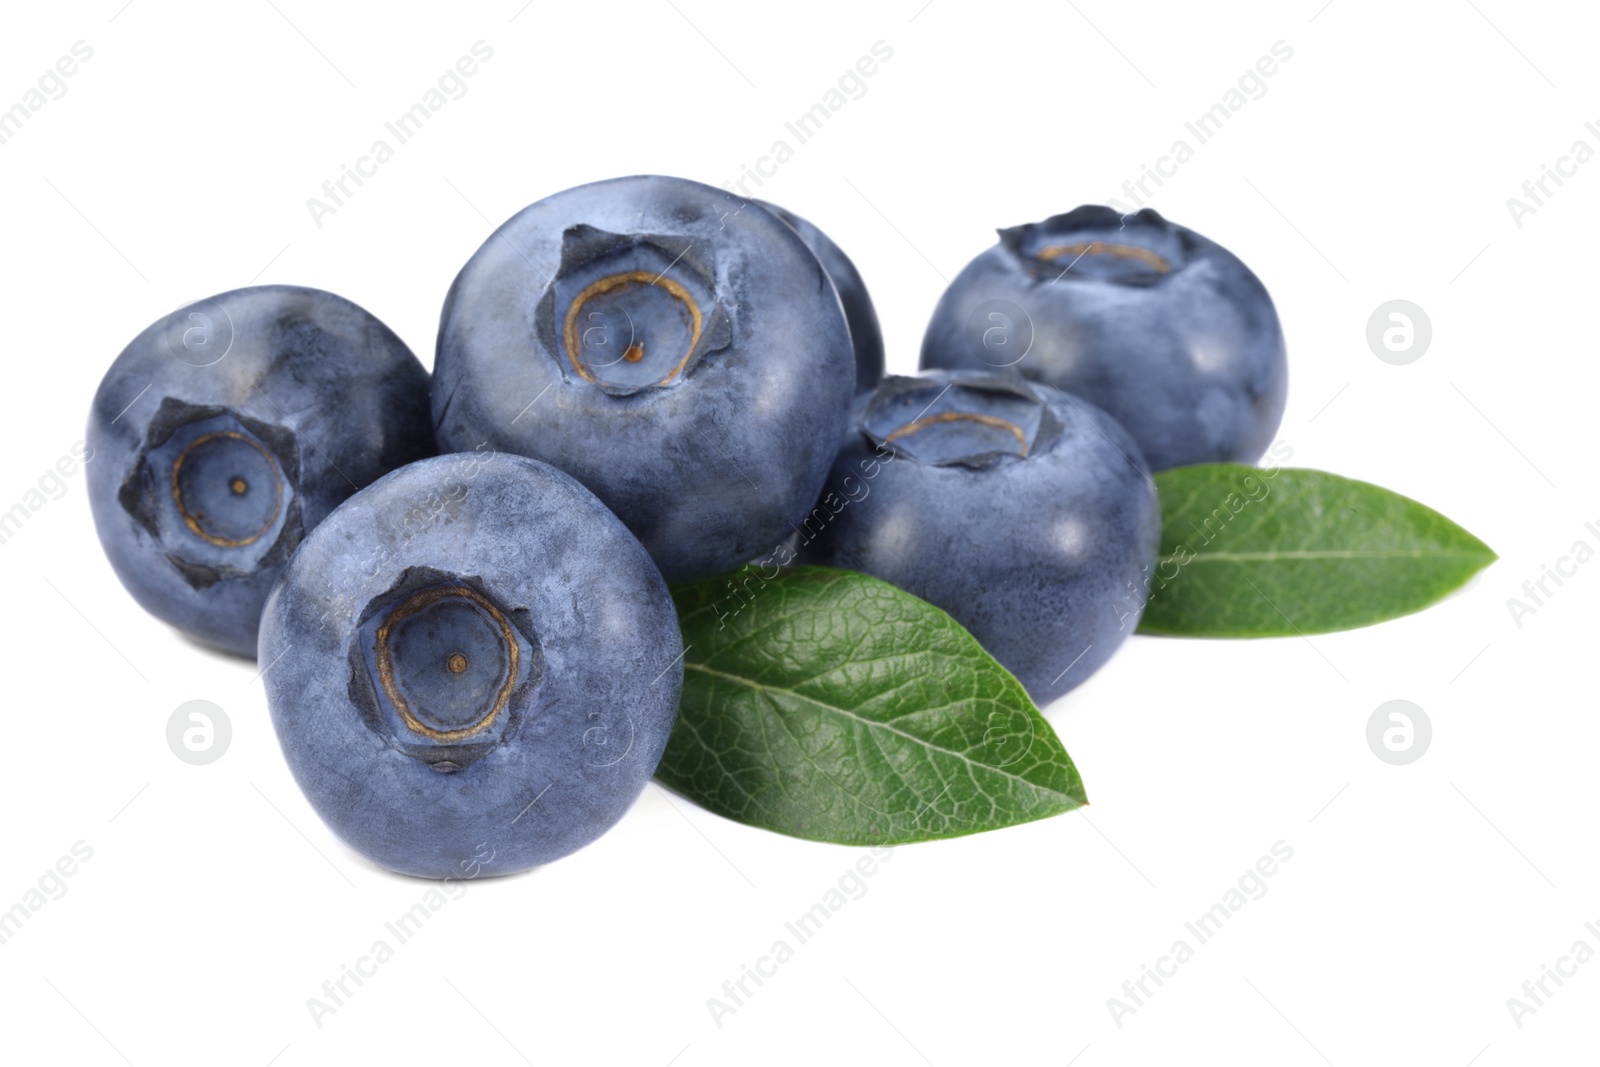 Photo of Many fresh ripe blueberries and leaves isolated on white